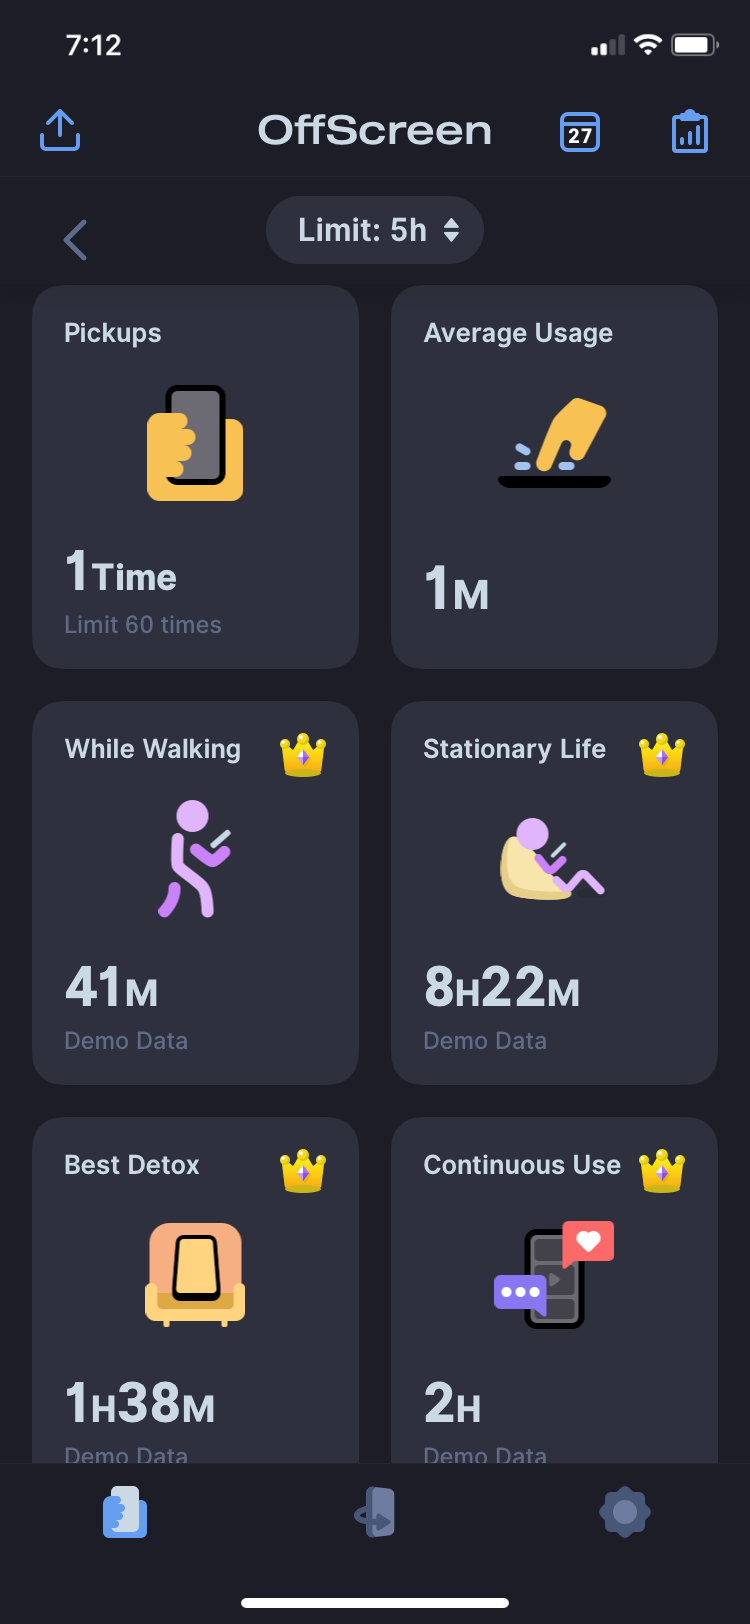 OffScreen app stats page